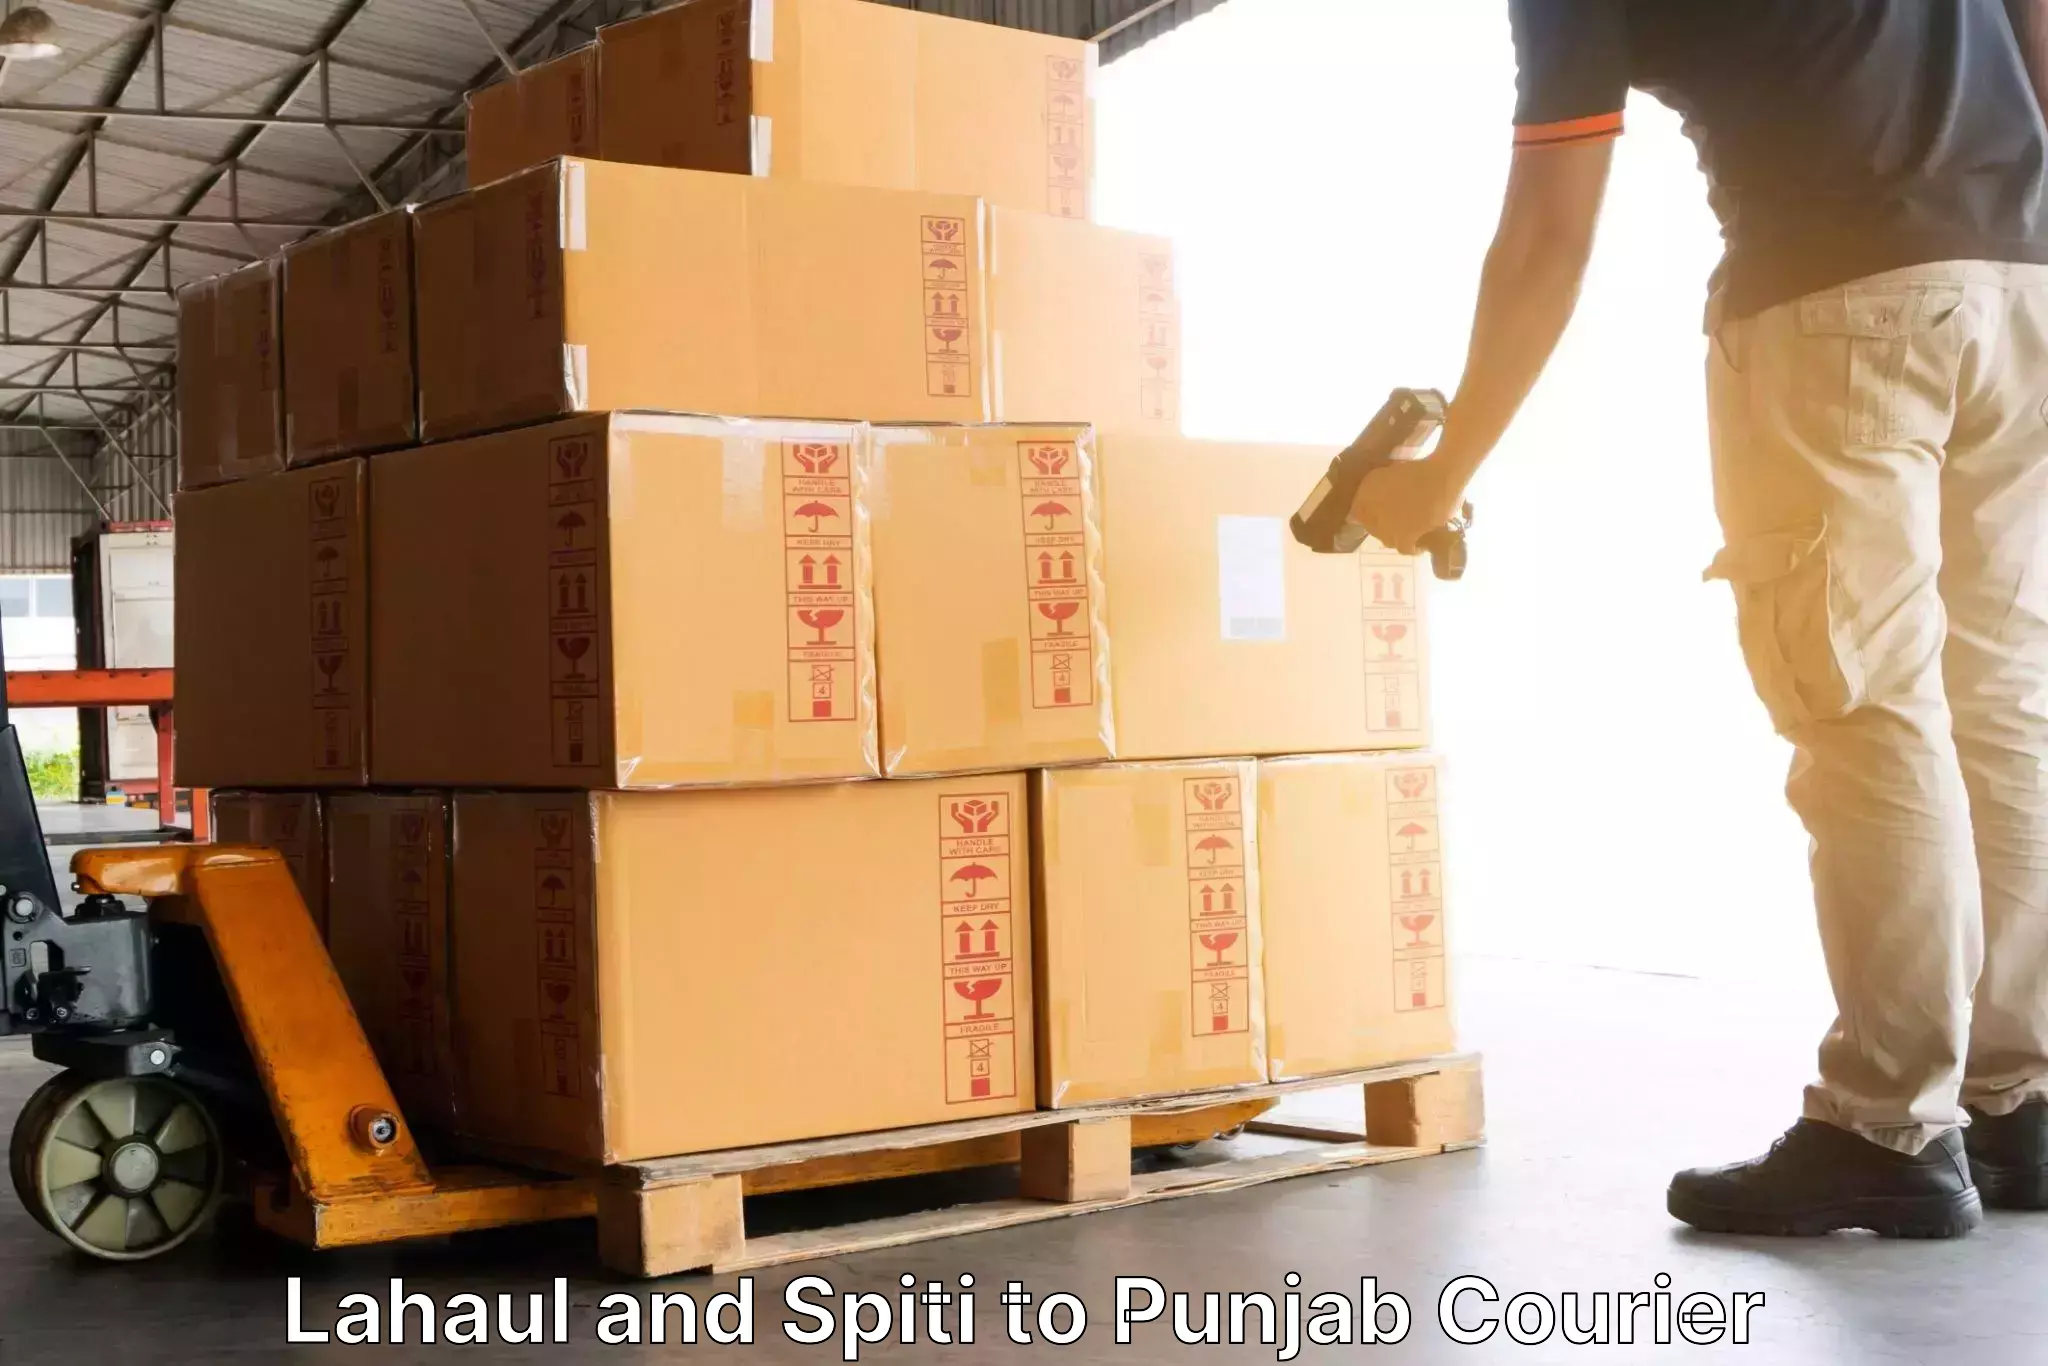 Nationwide shipping coverage Lahaul and Spiti to Fatehgarh Sahib